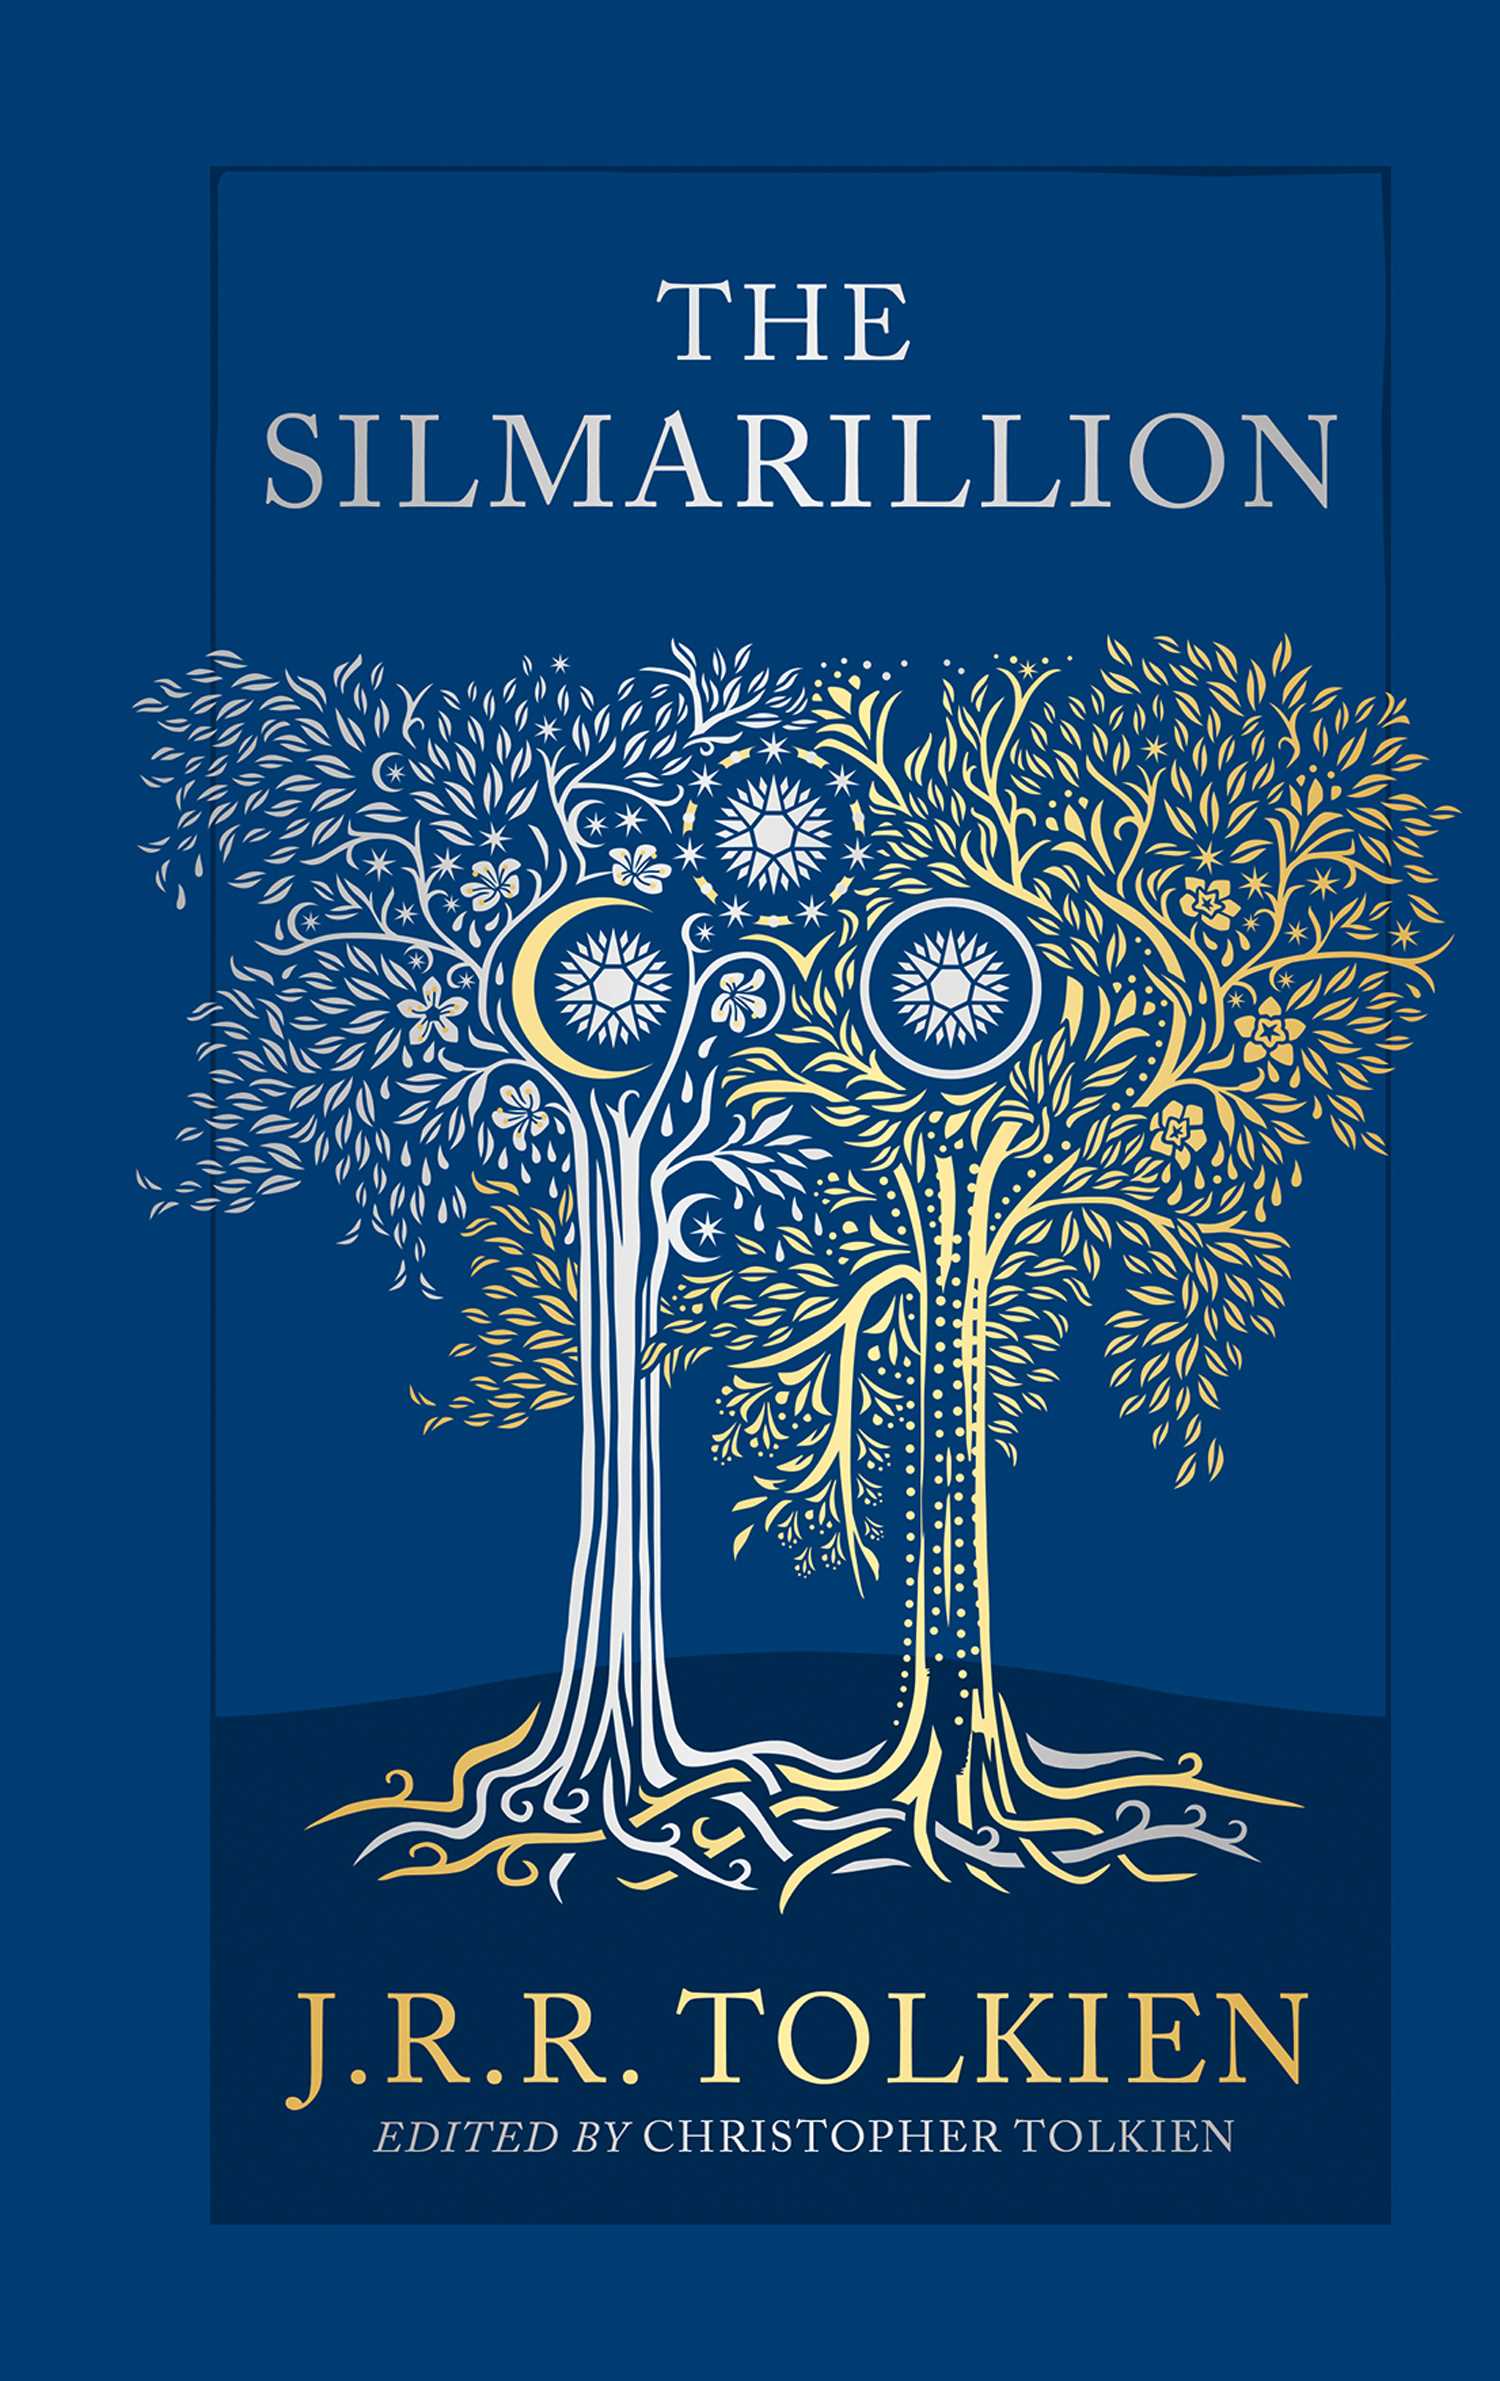 The Silmarillion (Special Collector’s Edition)